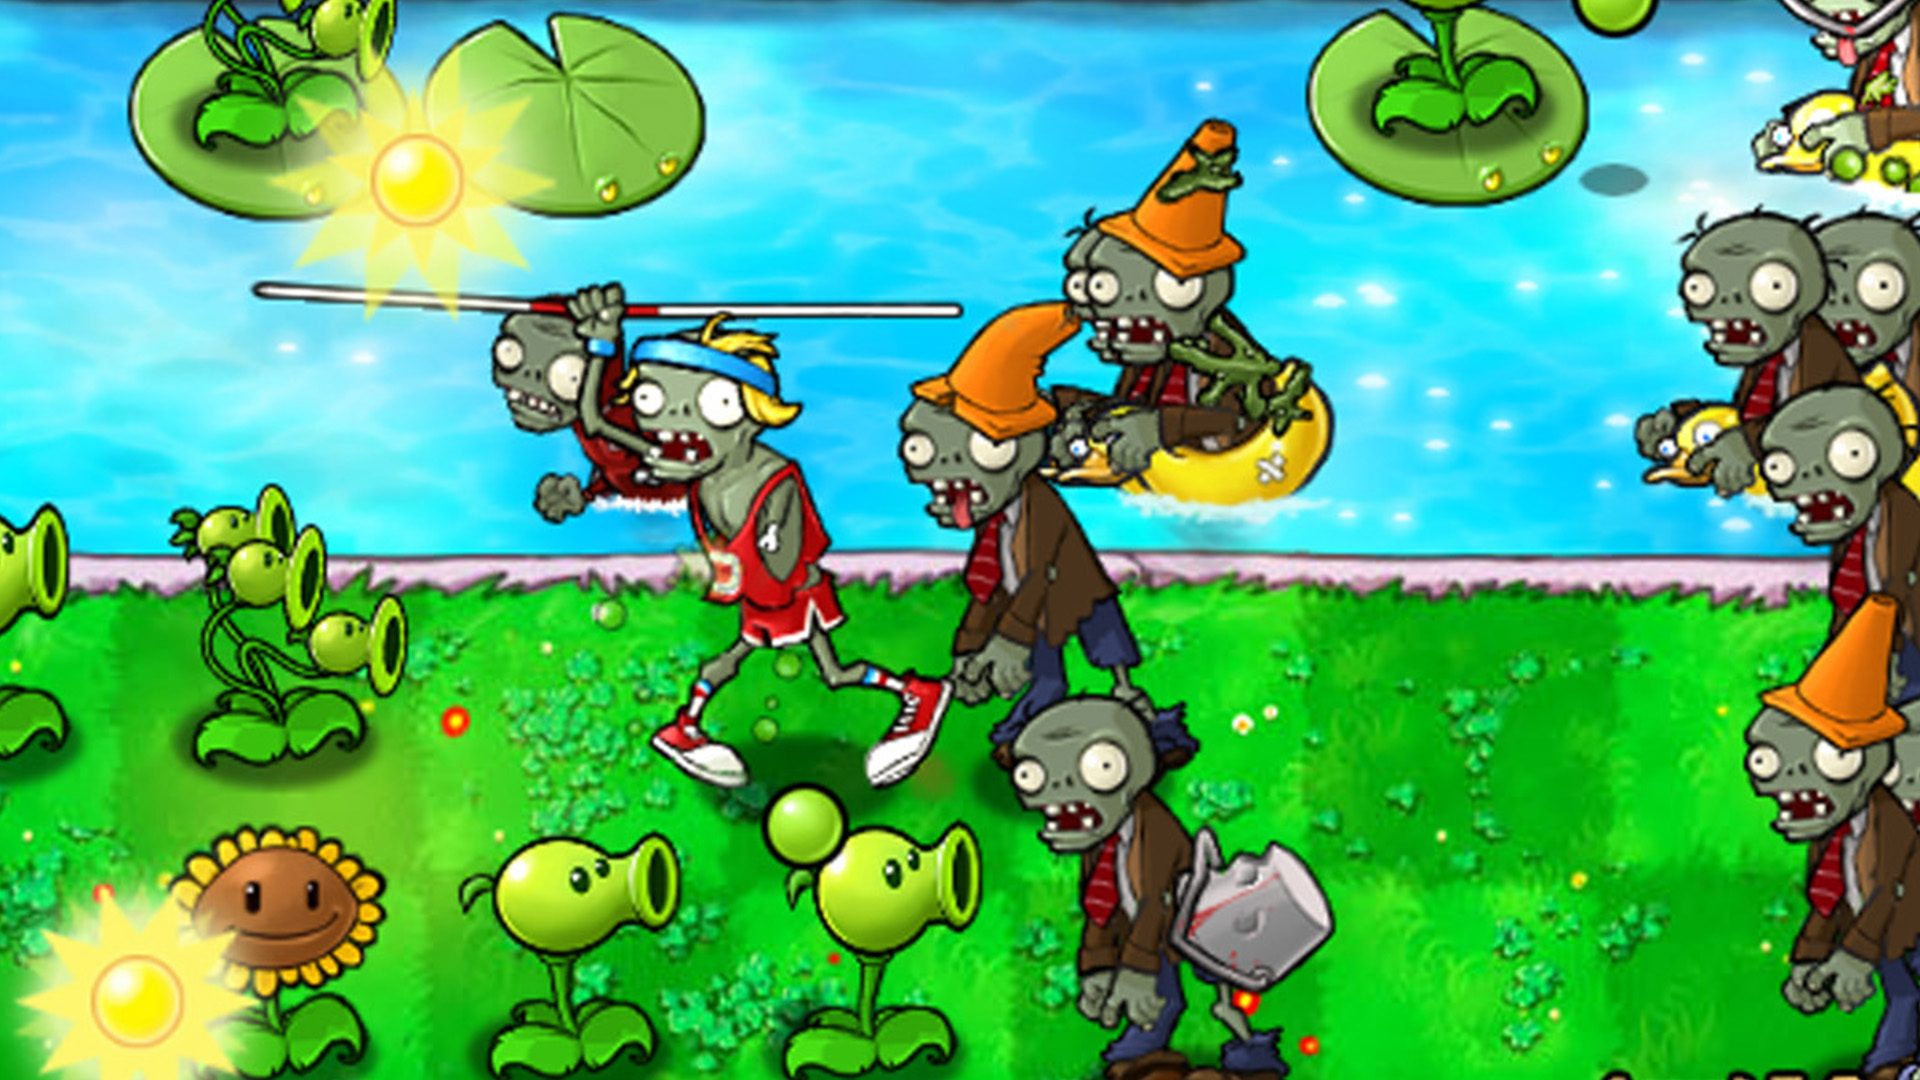 Out of nowhere, Plants vs Zombies 3 is available in prealpha